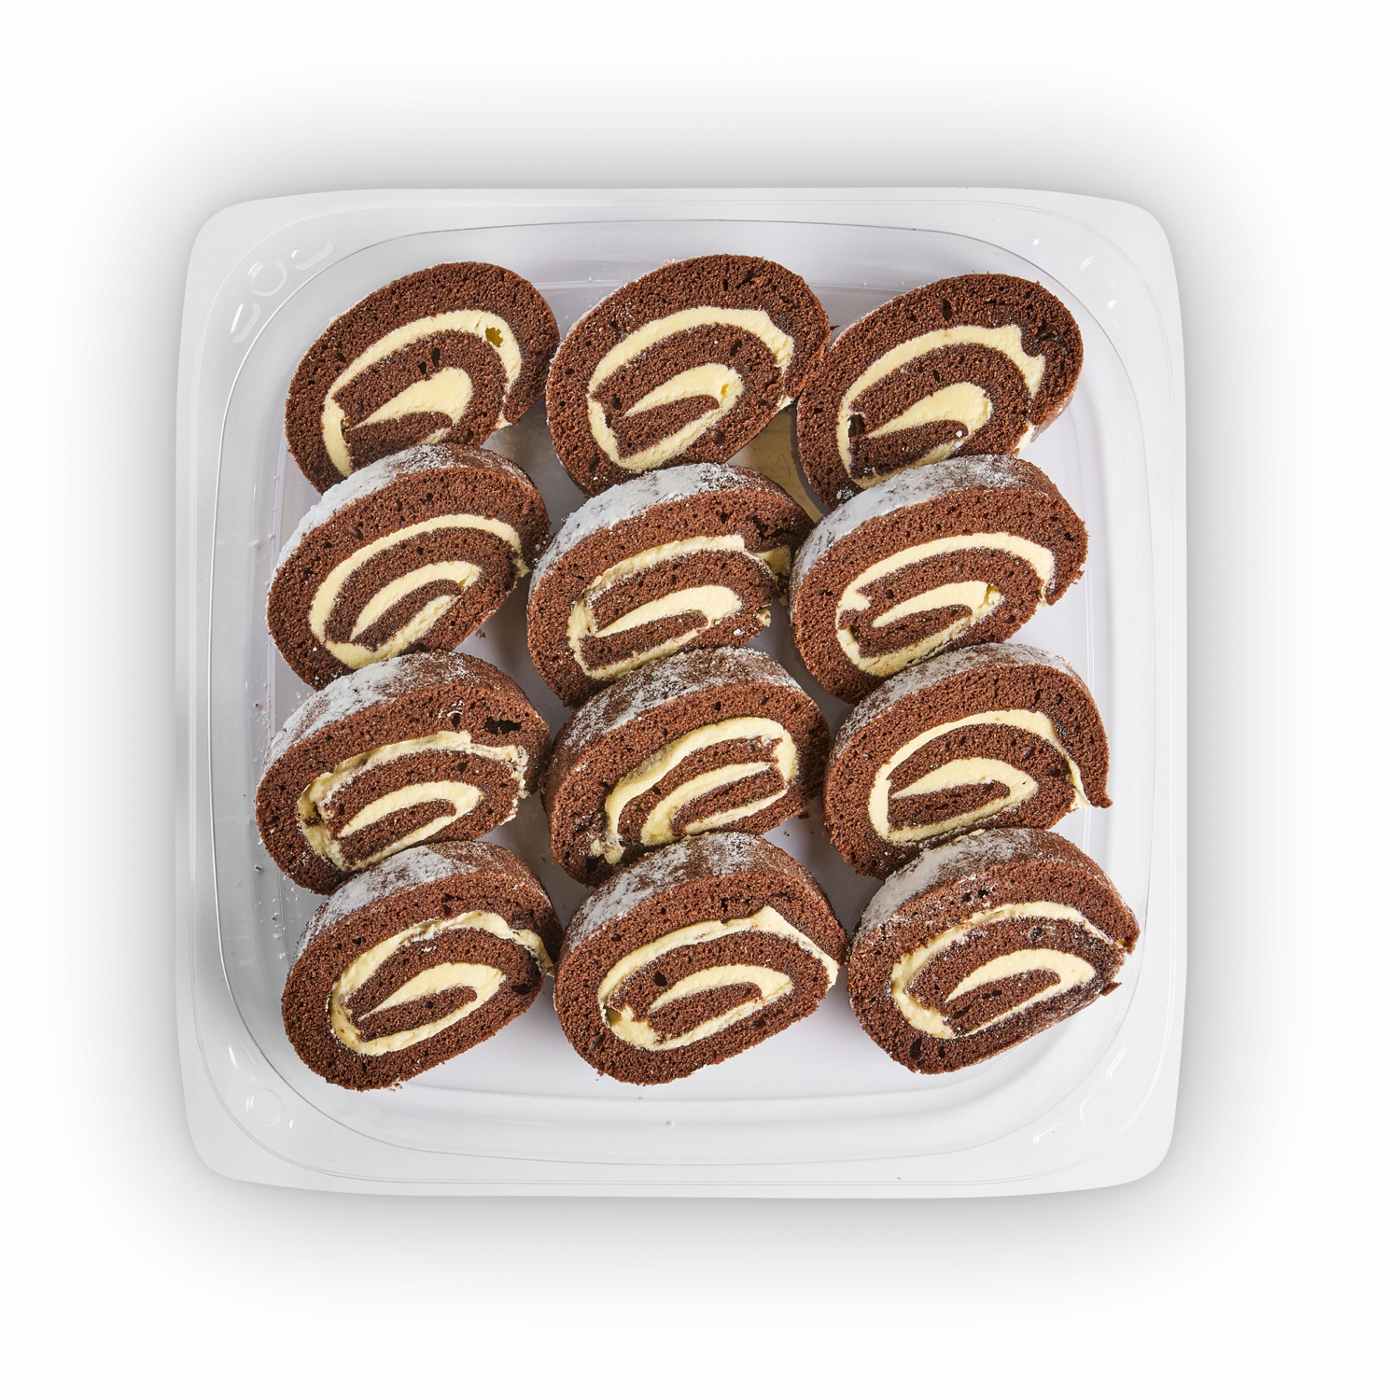 H-E-B Bakery Party Tray - Chocolate Cake Rolls; image 2 of 3